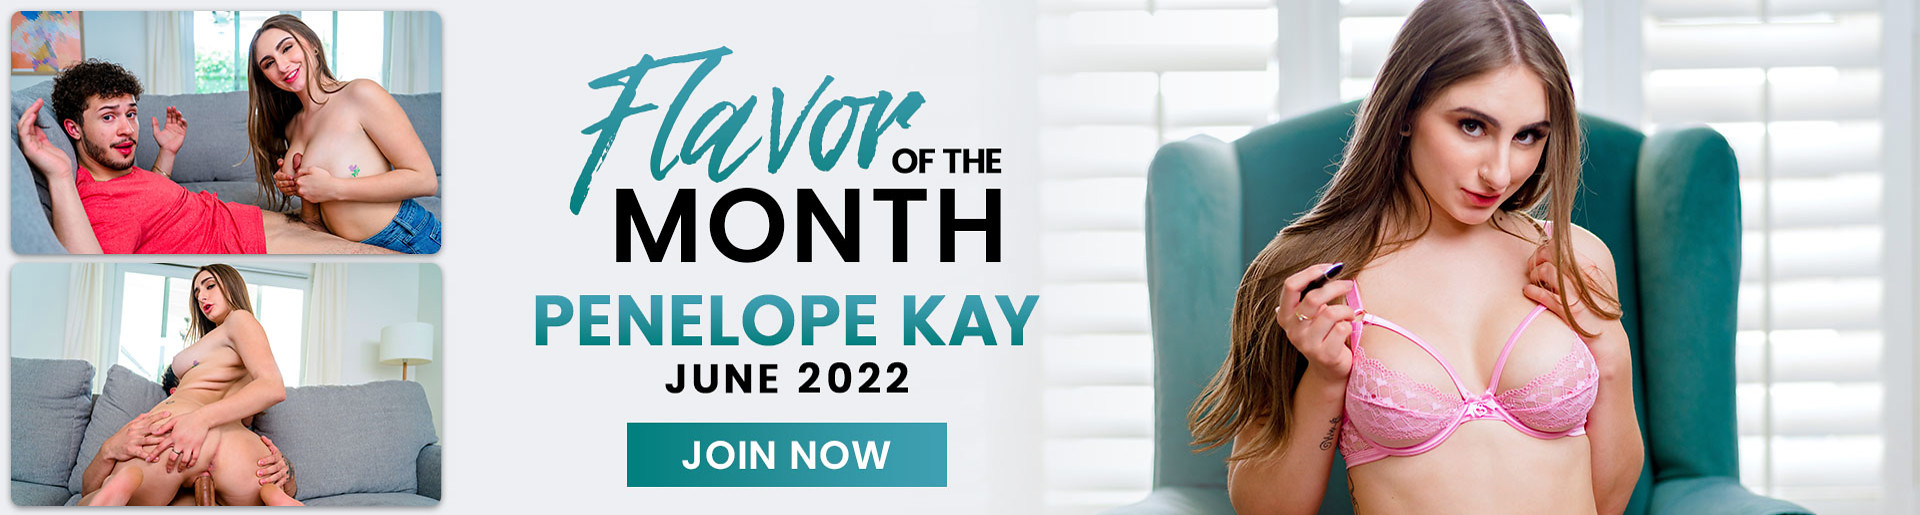 June 2022 Flavor Of The Month Penelope Kay